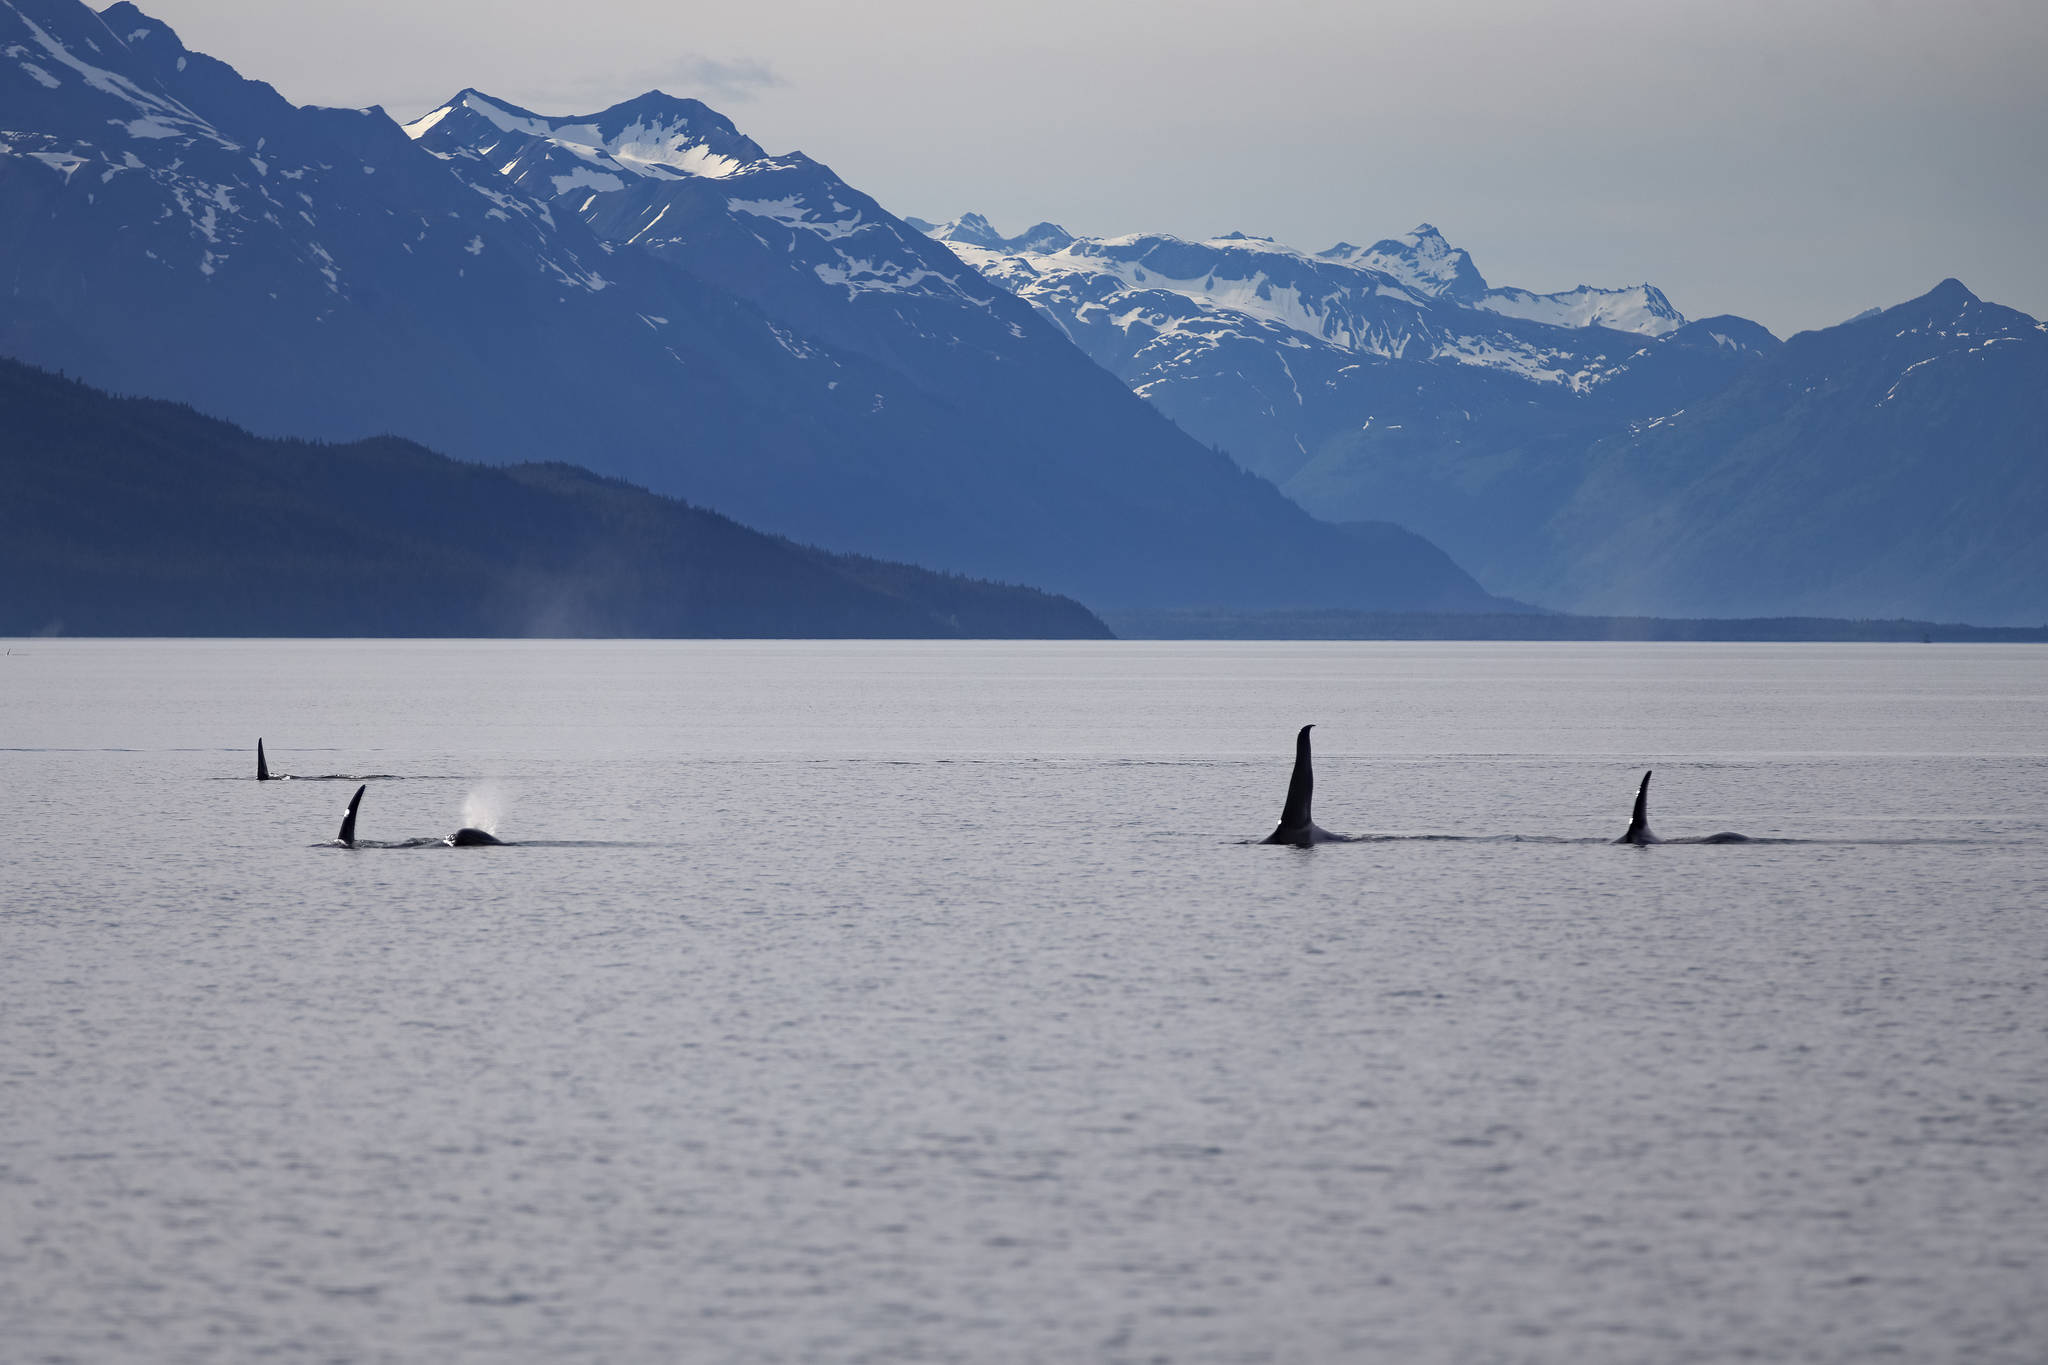 This June 18 photo shows an orca pod. It was taken on the Alaska Fjordlines from Juneau to Haines. (Courtesy Photo / John Riffey)